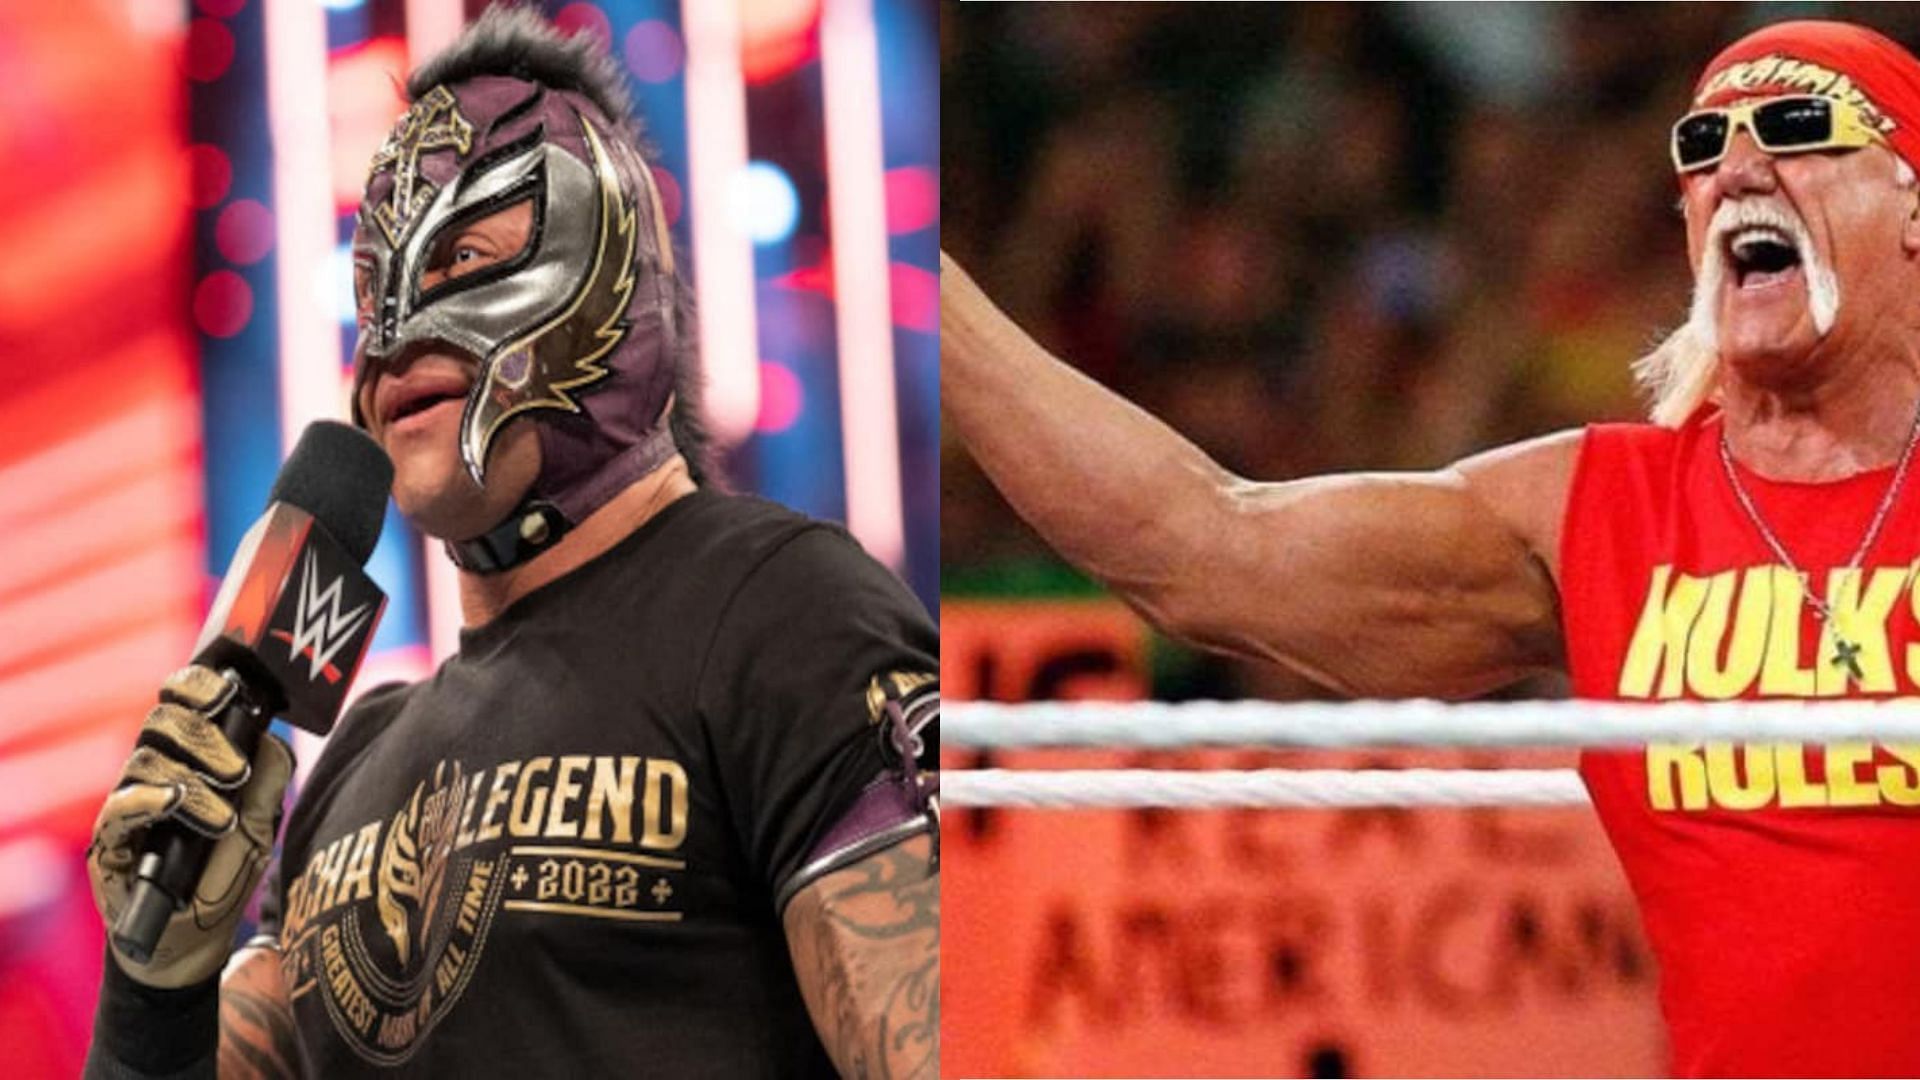 Rey Mysterio (L) and Hulk Hogan (R) have received death threats in the past.